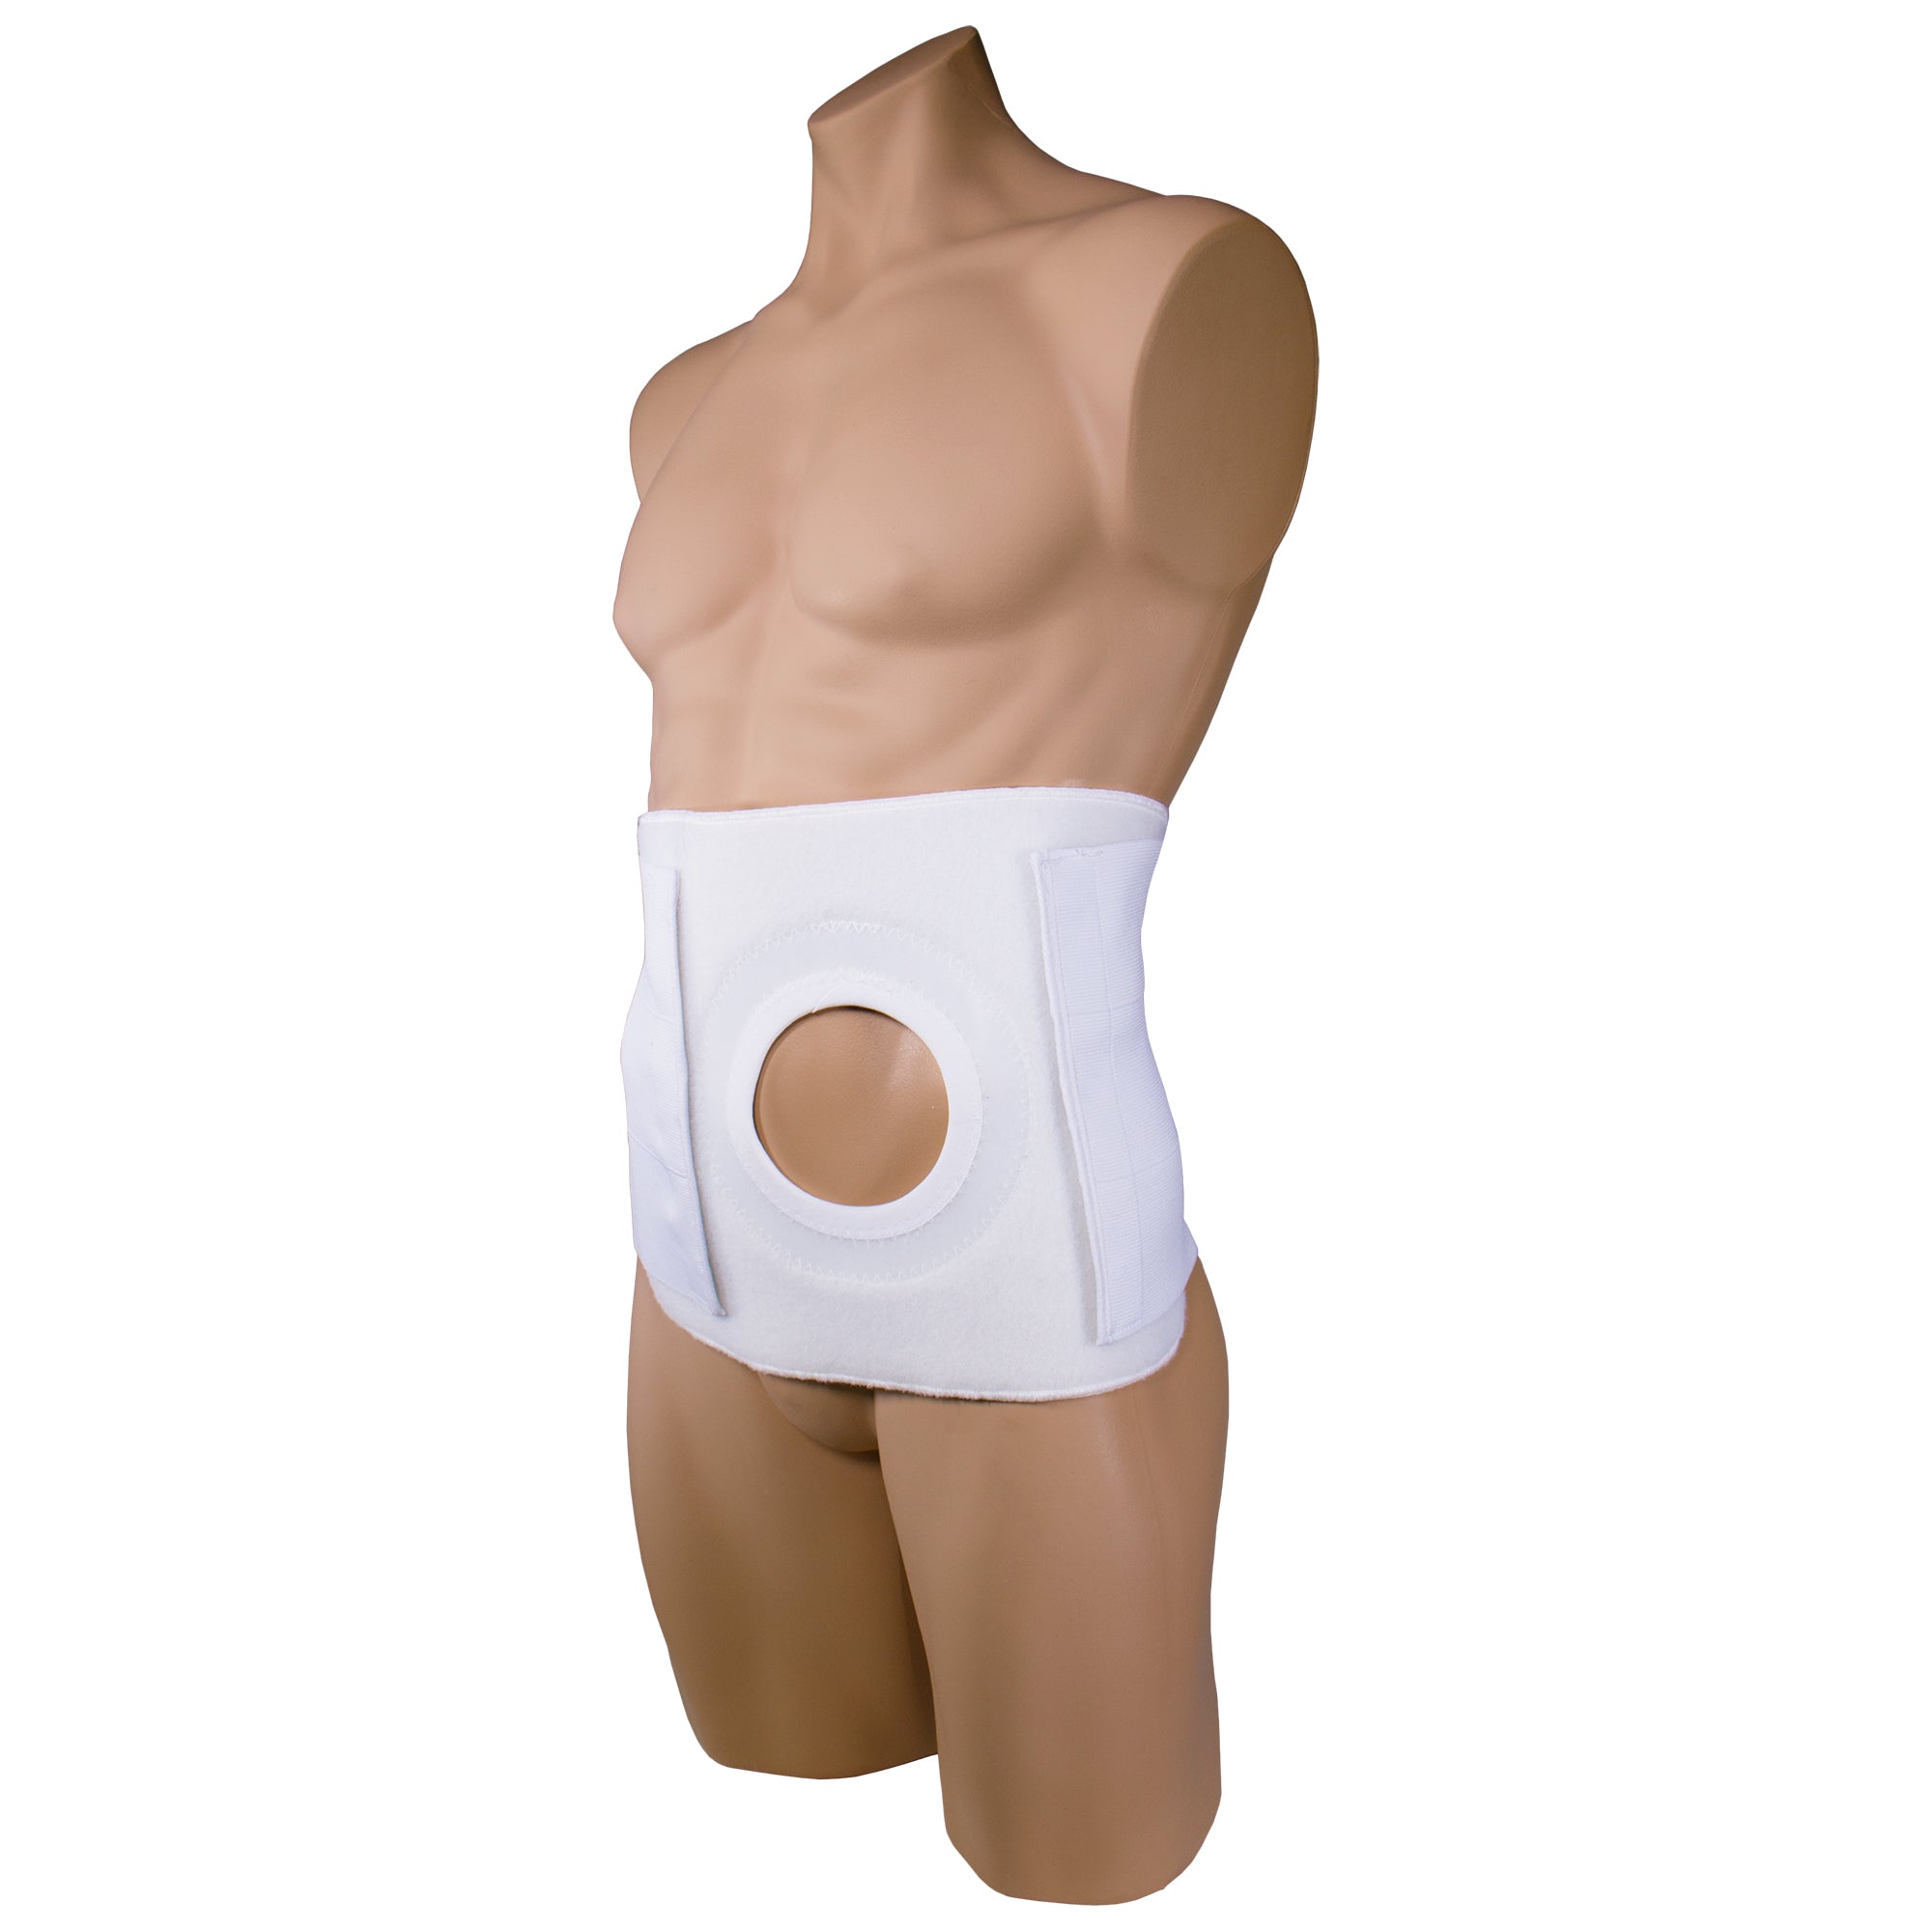 Accessories Needed for an Ostomy